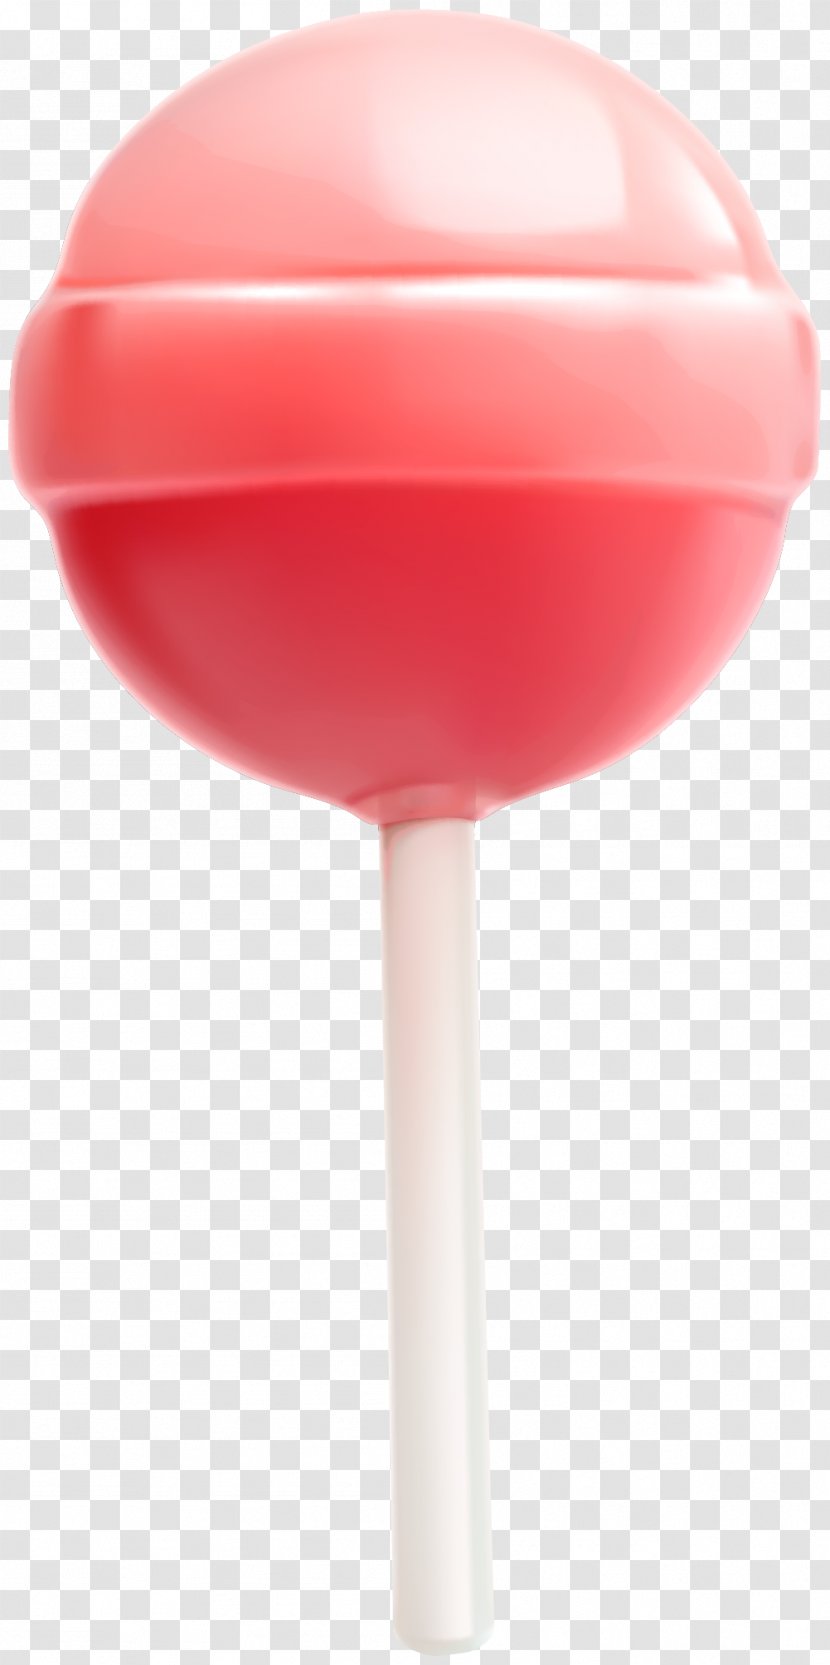 Lollipop Candy Watercolor Painting Food - Hand Painted Red Transparent PNG